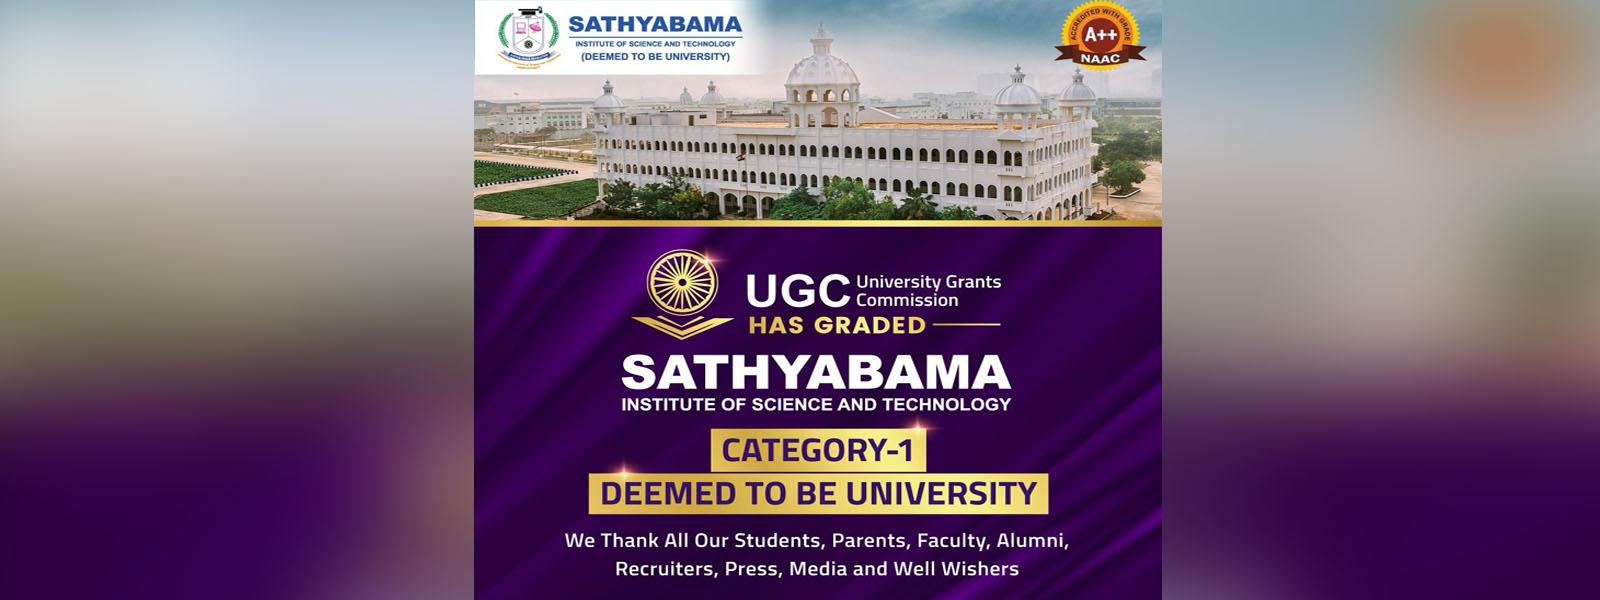 UGC has graded Sathyabama Institute and Science and Technology is declared as CATEGORY-I Institution